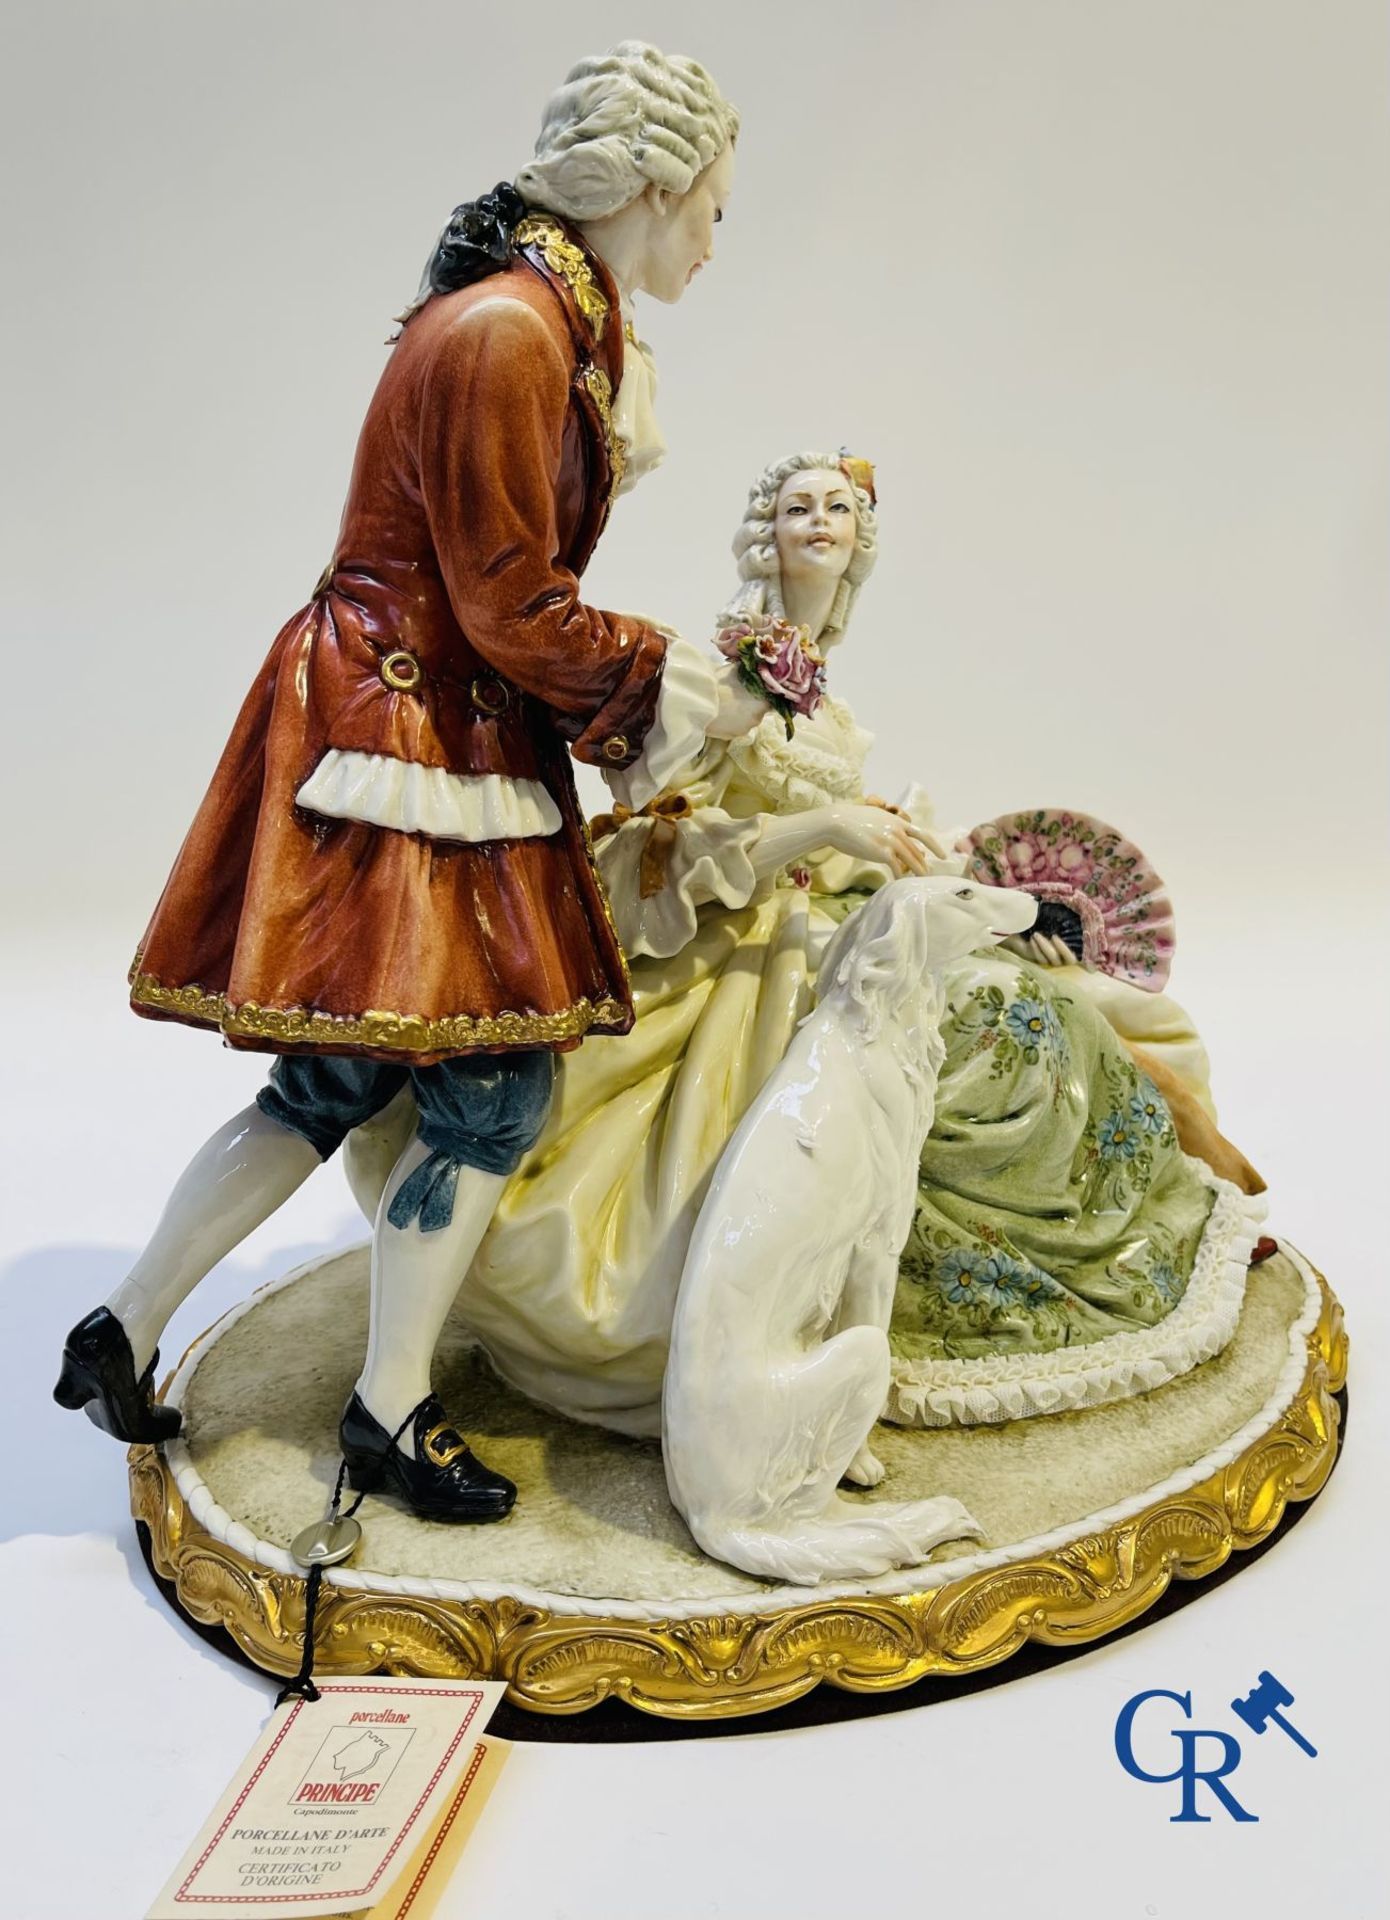 Porcelain: Capodimonte: Exceptional group in Italian porcelain with lace. - Image 3 of 9